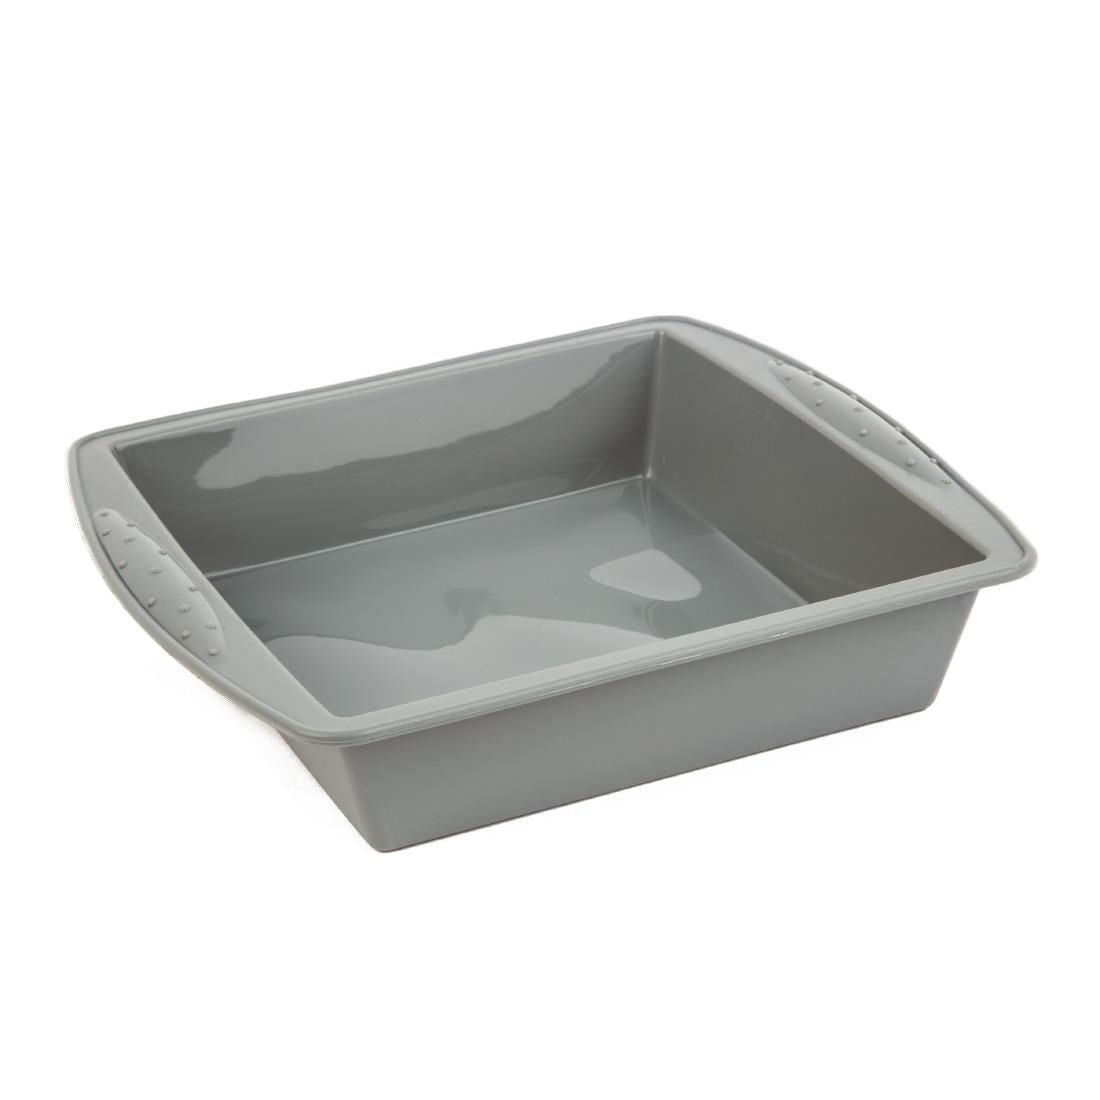 DA532 Vogue Flexible Silicone Square Bake Pan 245mm JD Catering Equipment Solutions Ltd